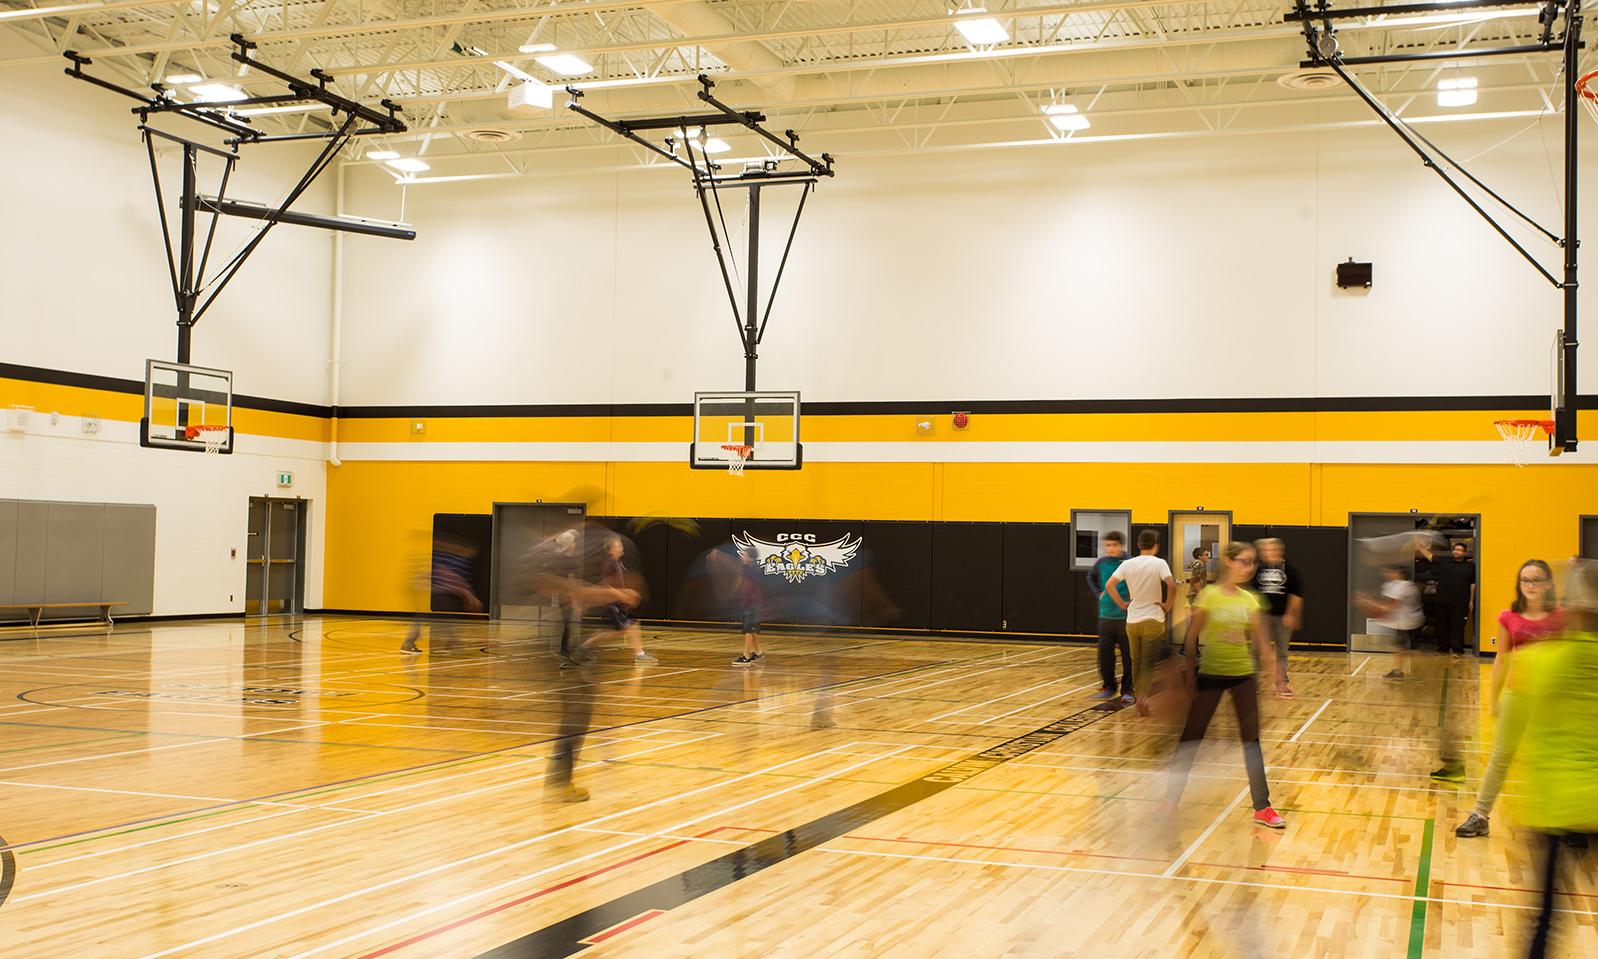 Calvin Christian School. Looking across the gym highlighting the shiny wood floor and the retractable basketball nets.